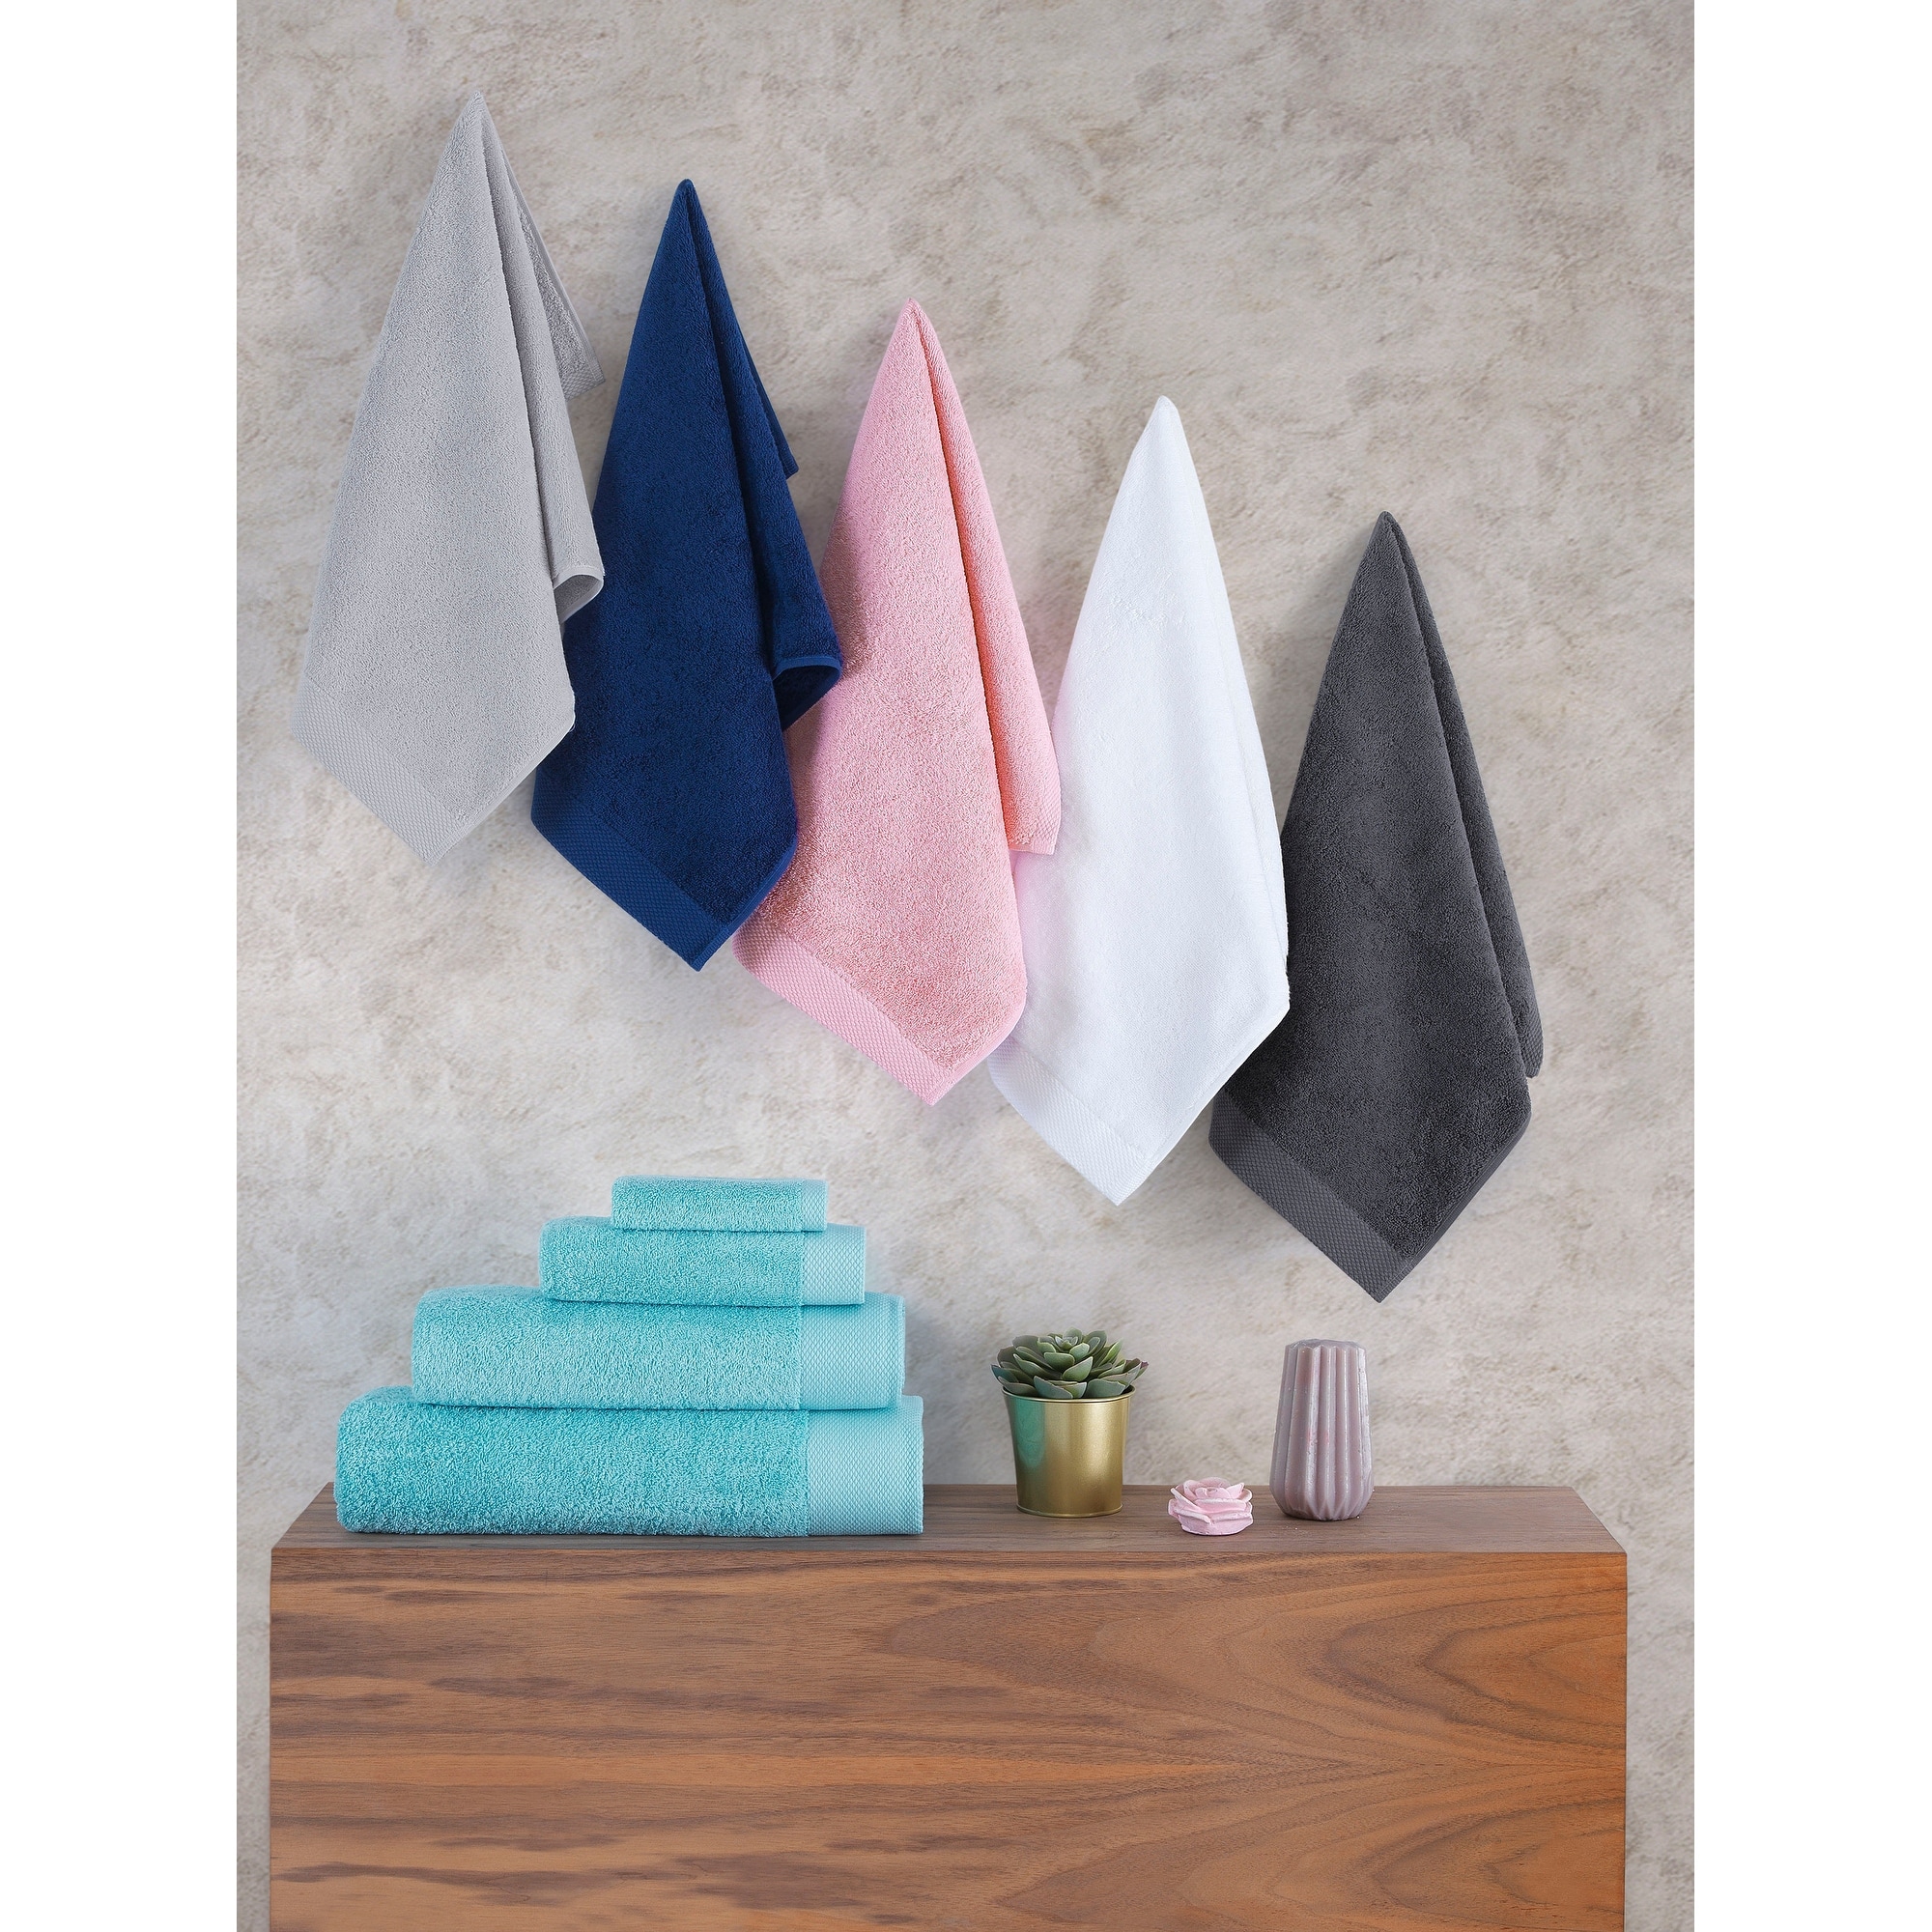 Serafina Home Teal Blue Kitchen Towels: 100% Cotton Soft Absorbent Terry  Cloth, Set of 3 